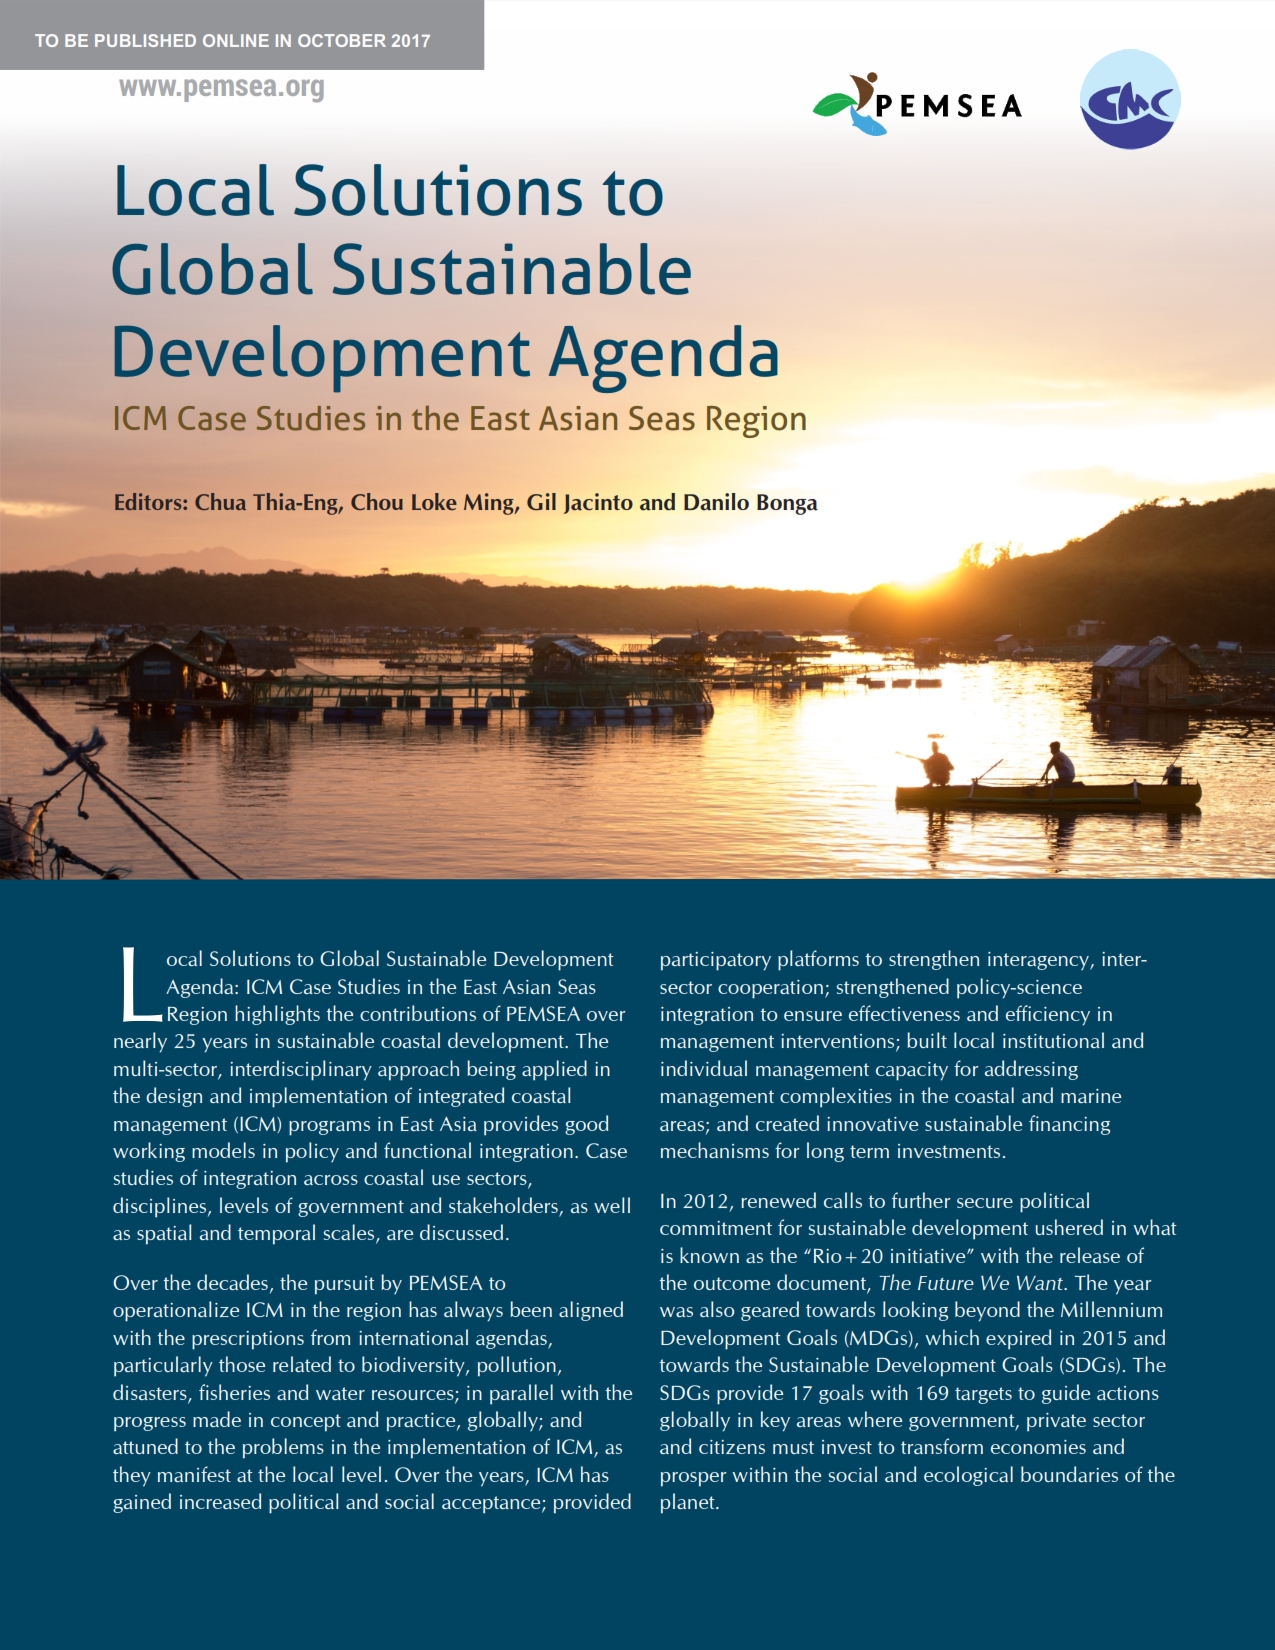 Local Solutions to the Global Sustainable Development Agenda